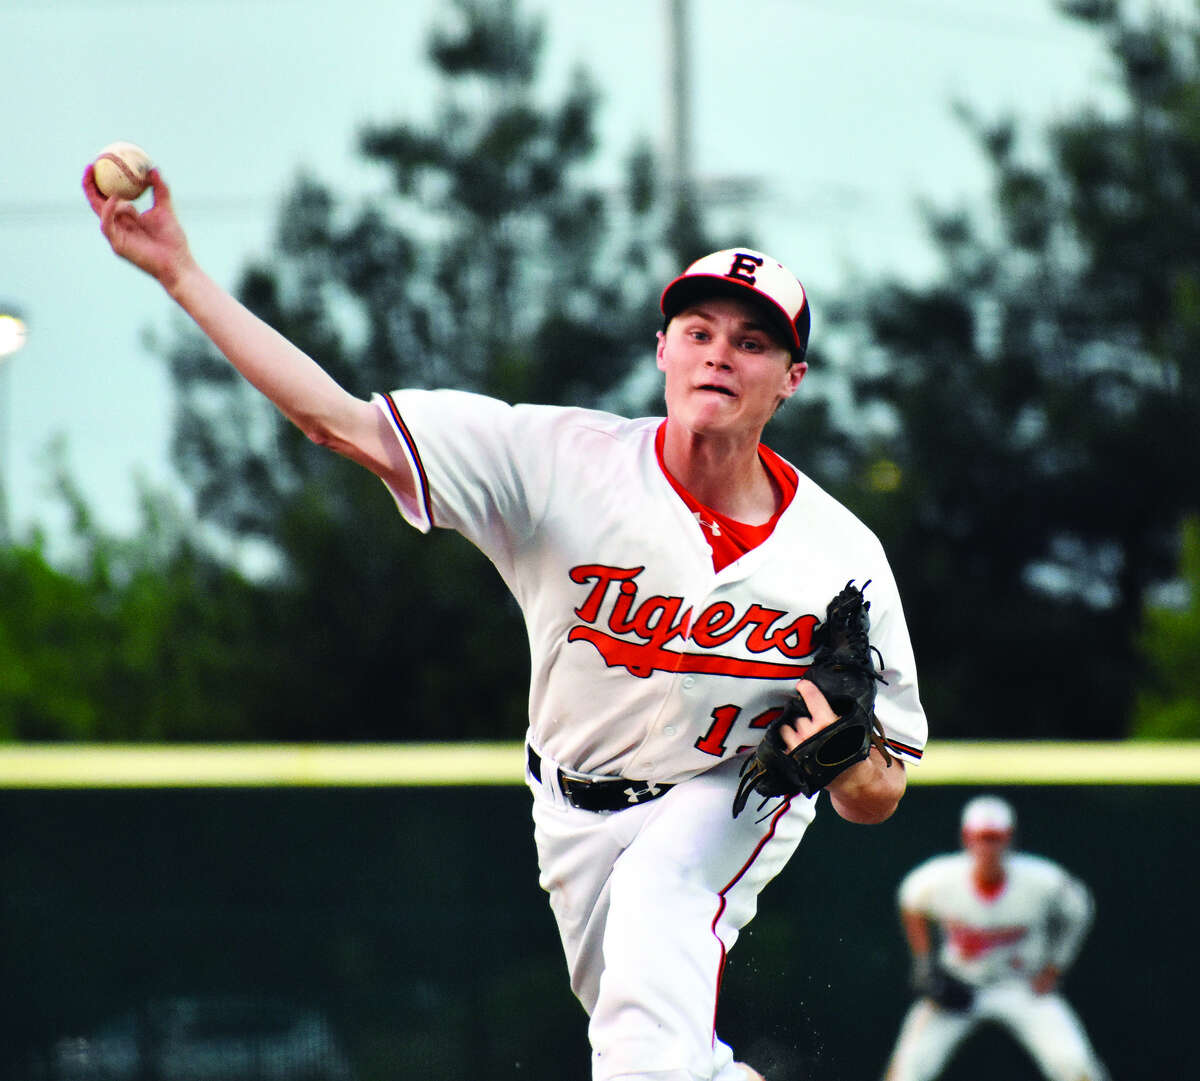 Edwardsville reliever Jonathon Yancik delivers a pitch in the sixth inning of Monday’s non-conference victory over Waterloo.